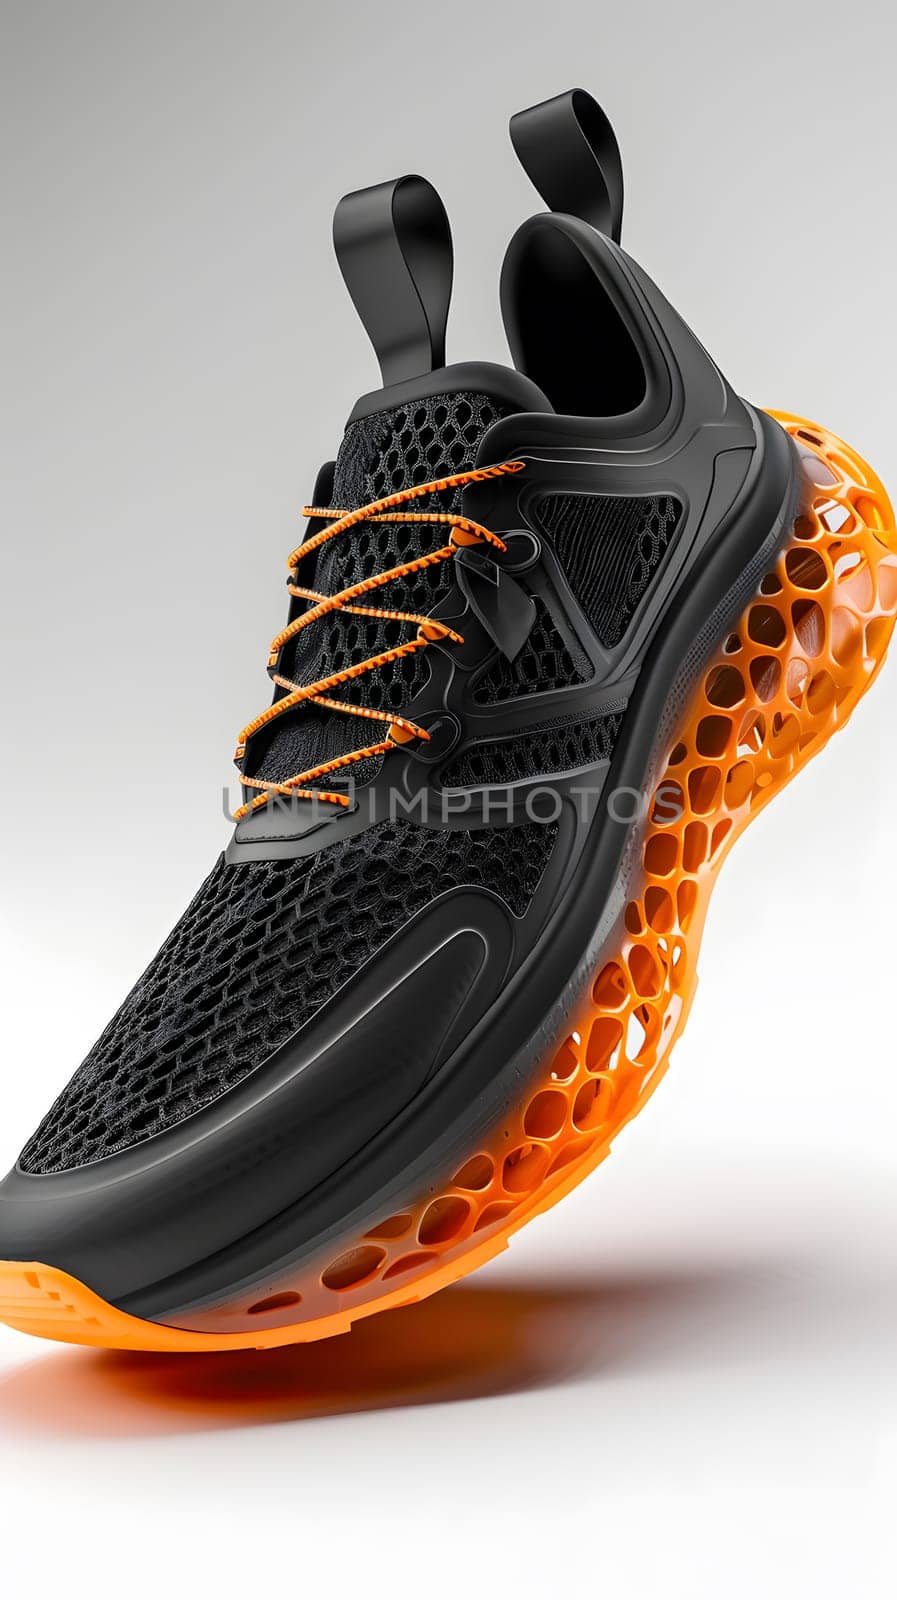 Athletic shoe with black and orange design on white surface by Nadtochiy